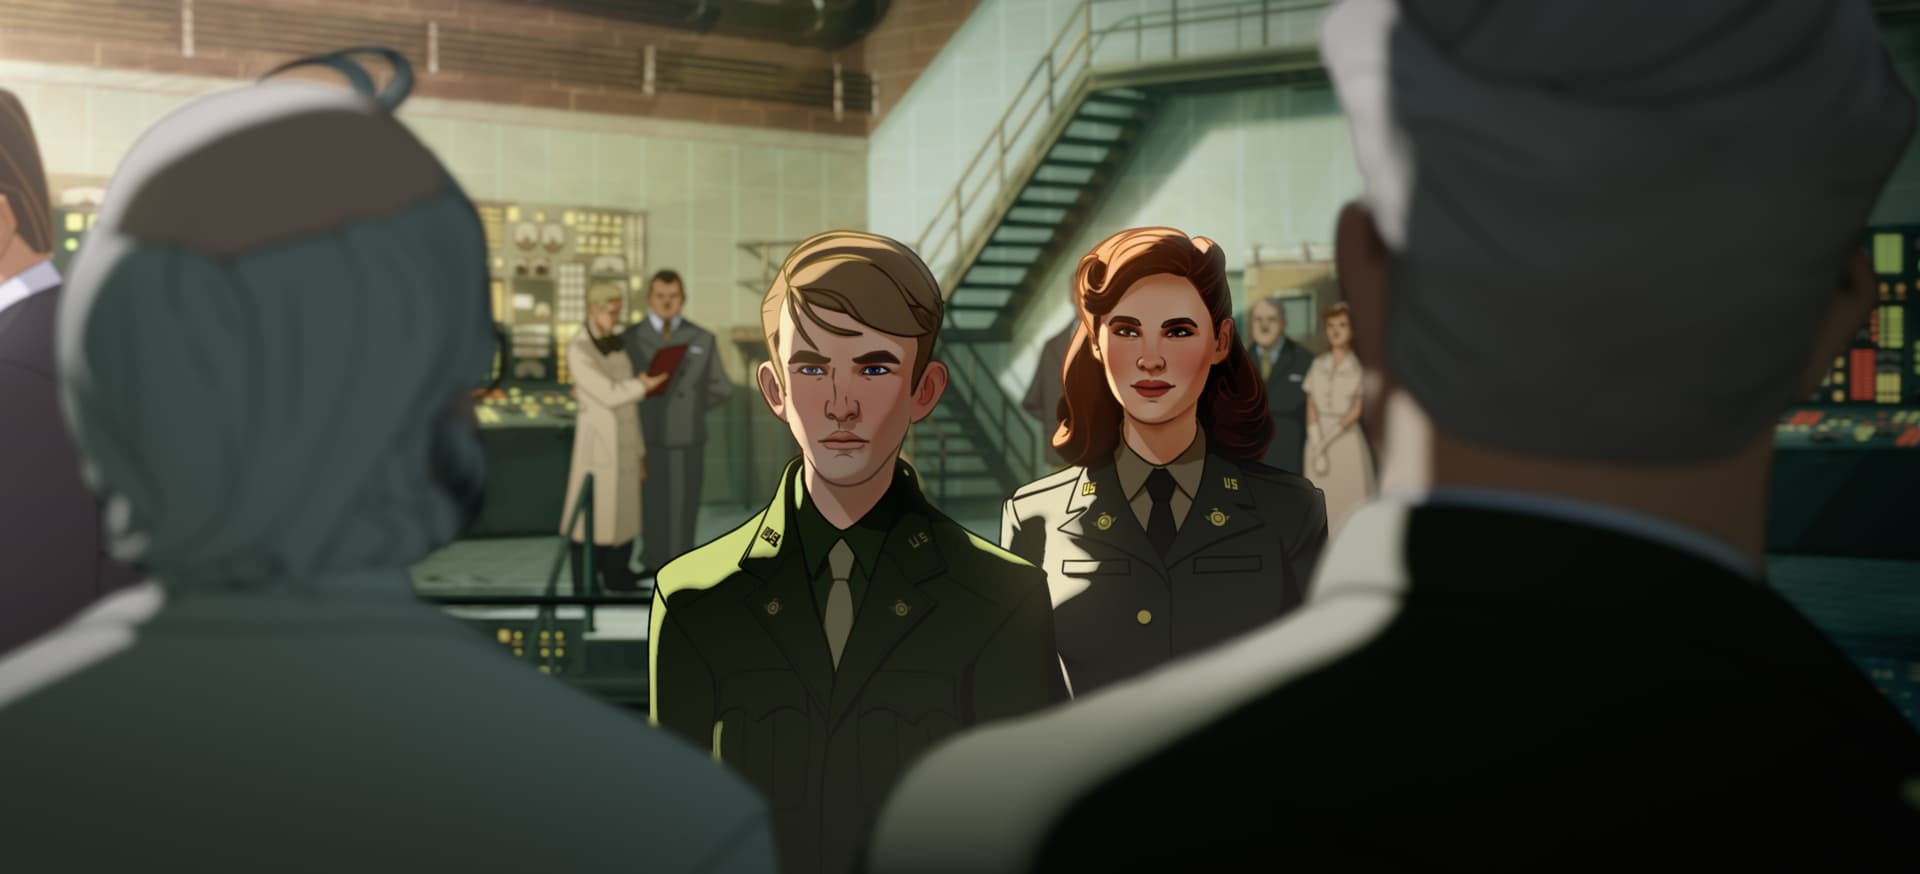 Steve Rogers and Peggy Carter | What If...?